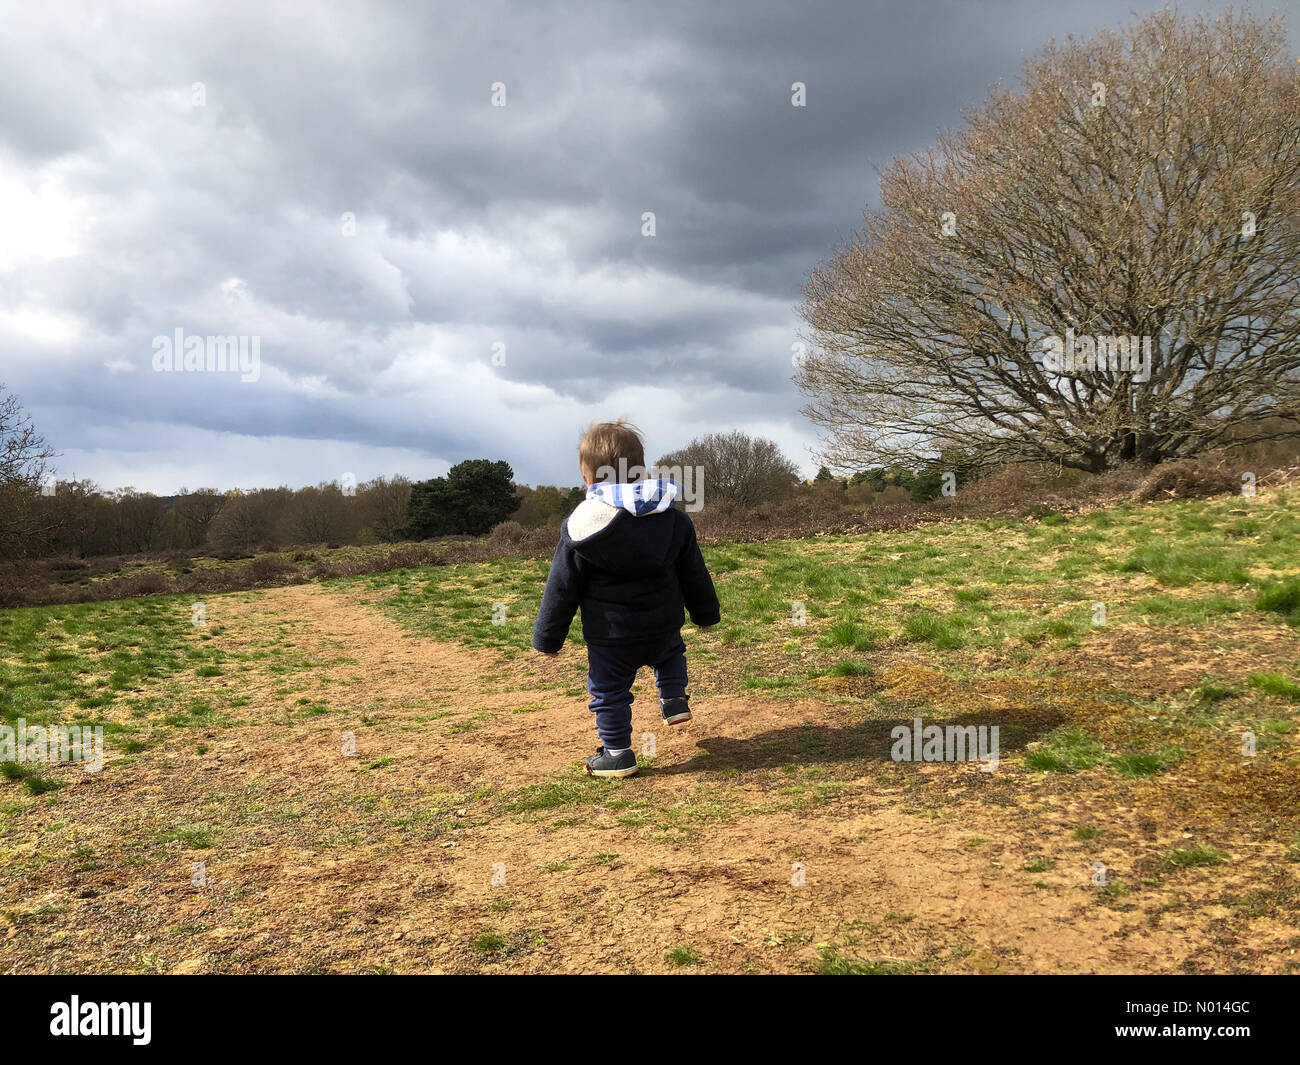 UK Weather: Cloudy in Godalming. Puttenham Common, Godalming. 06th April 2021. An unsettled afternoon for the Home Counties with wintry showers. Cloudy skies over Puttenham Common, Godalming, Surrey. Credit: jamesjagger/StockimoNews/Alamy Live News Stock Photo